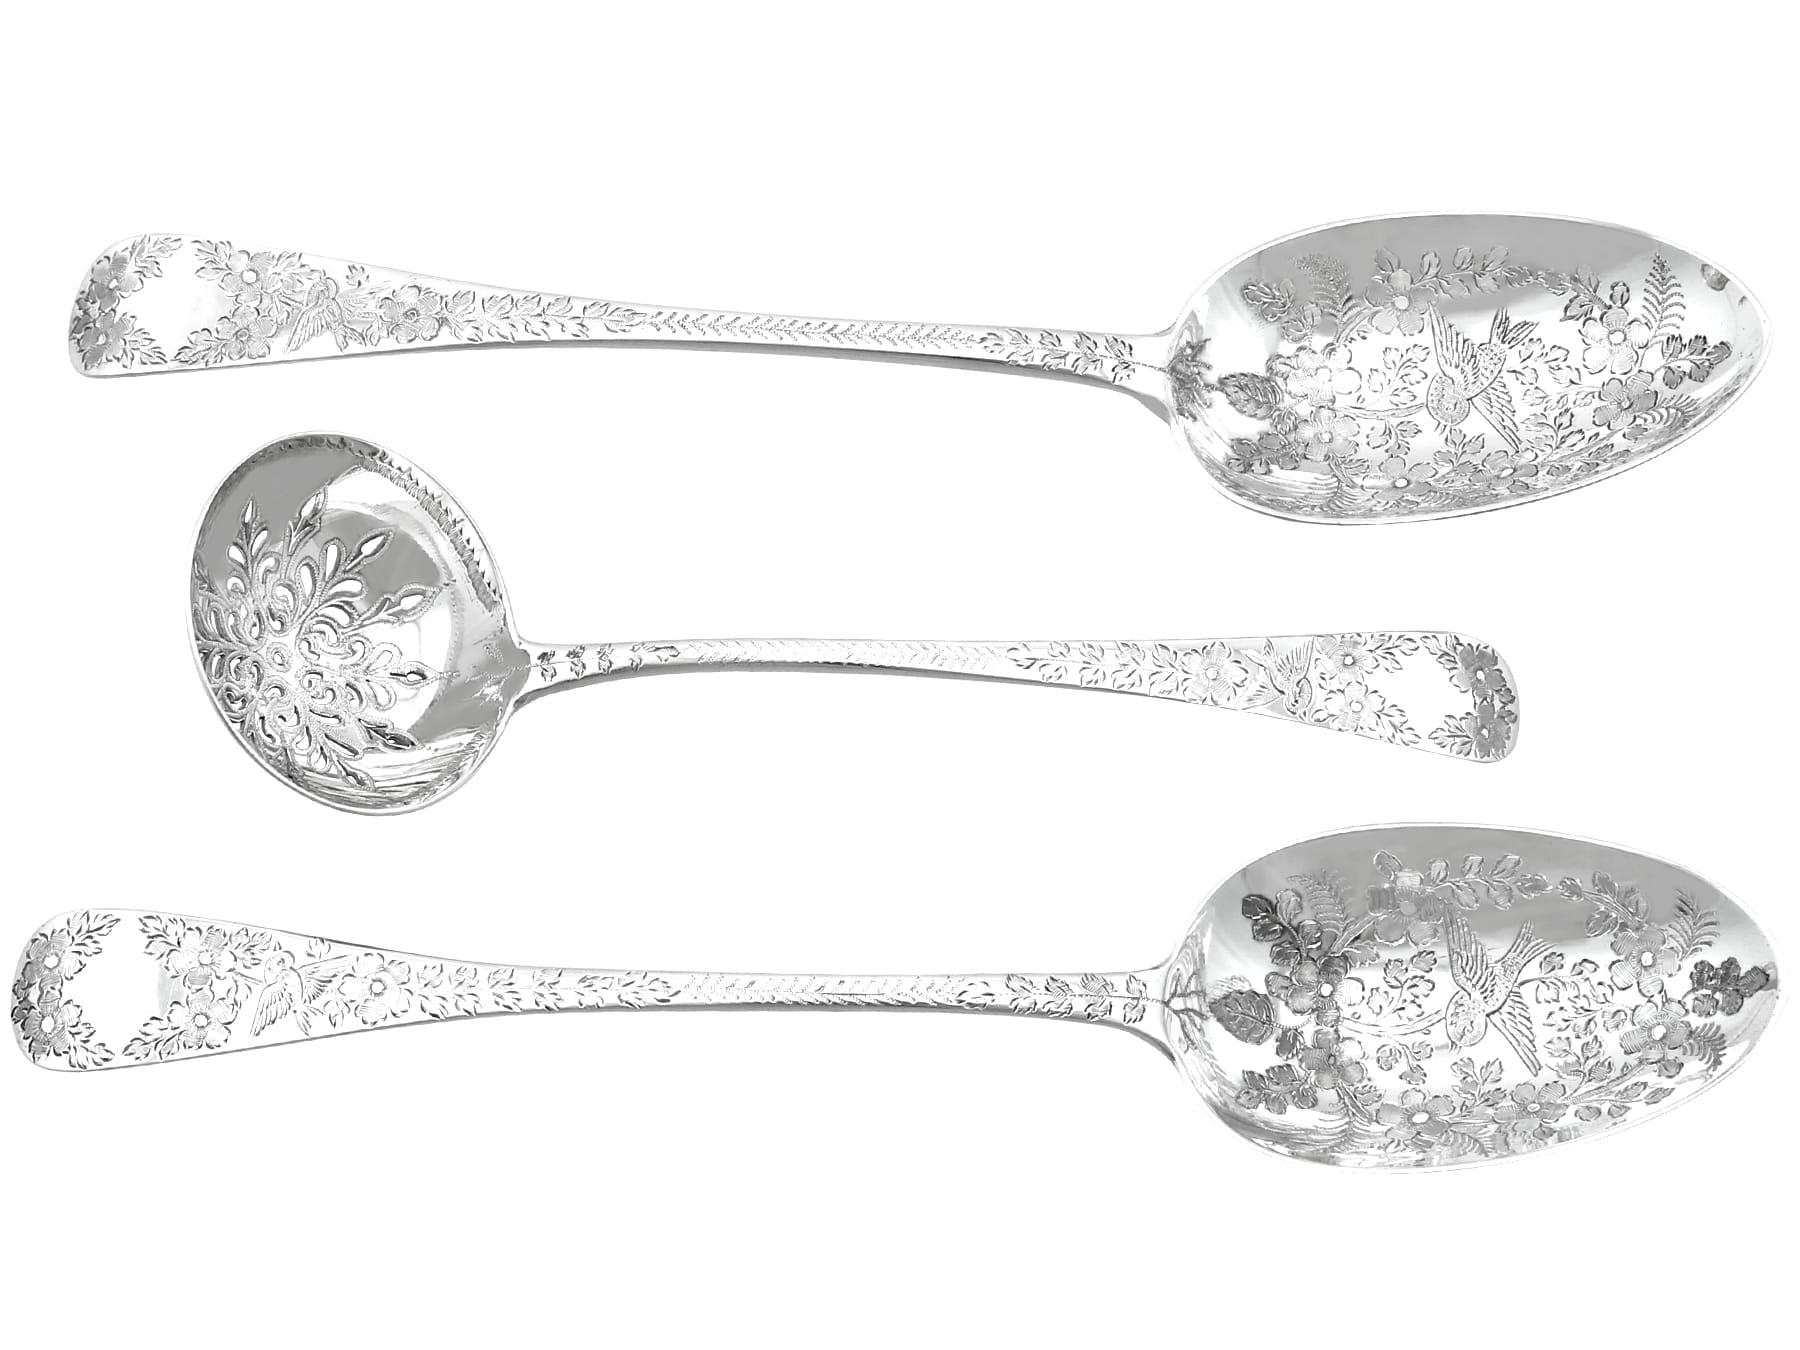 An exceptional, fine and impressive pair of antique Victorian English sterling silver fruit / dessert serving set; an addition to our silver flatware collection

This exceptional antique Victorian sterling silver fruit serving set consists of a pair